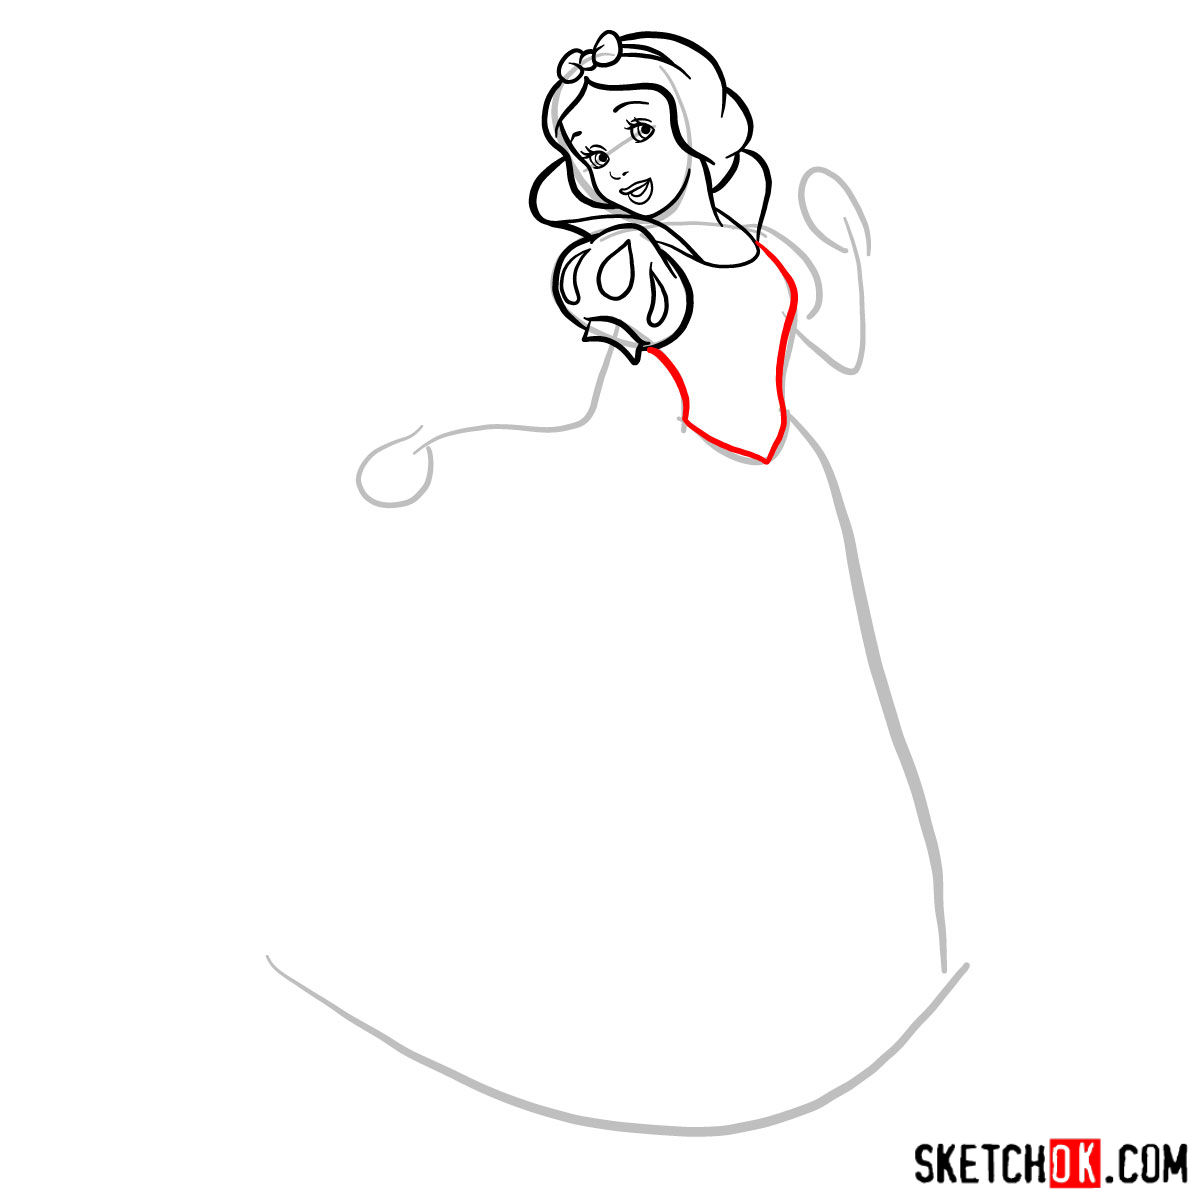 How to draw Snow White - step 07